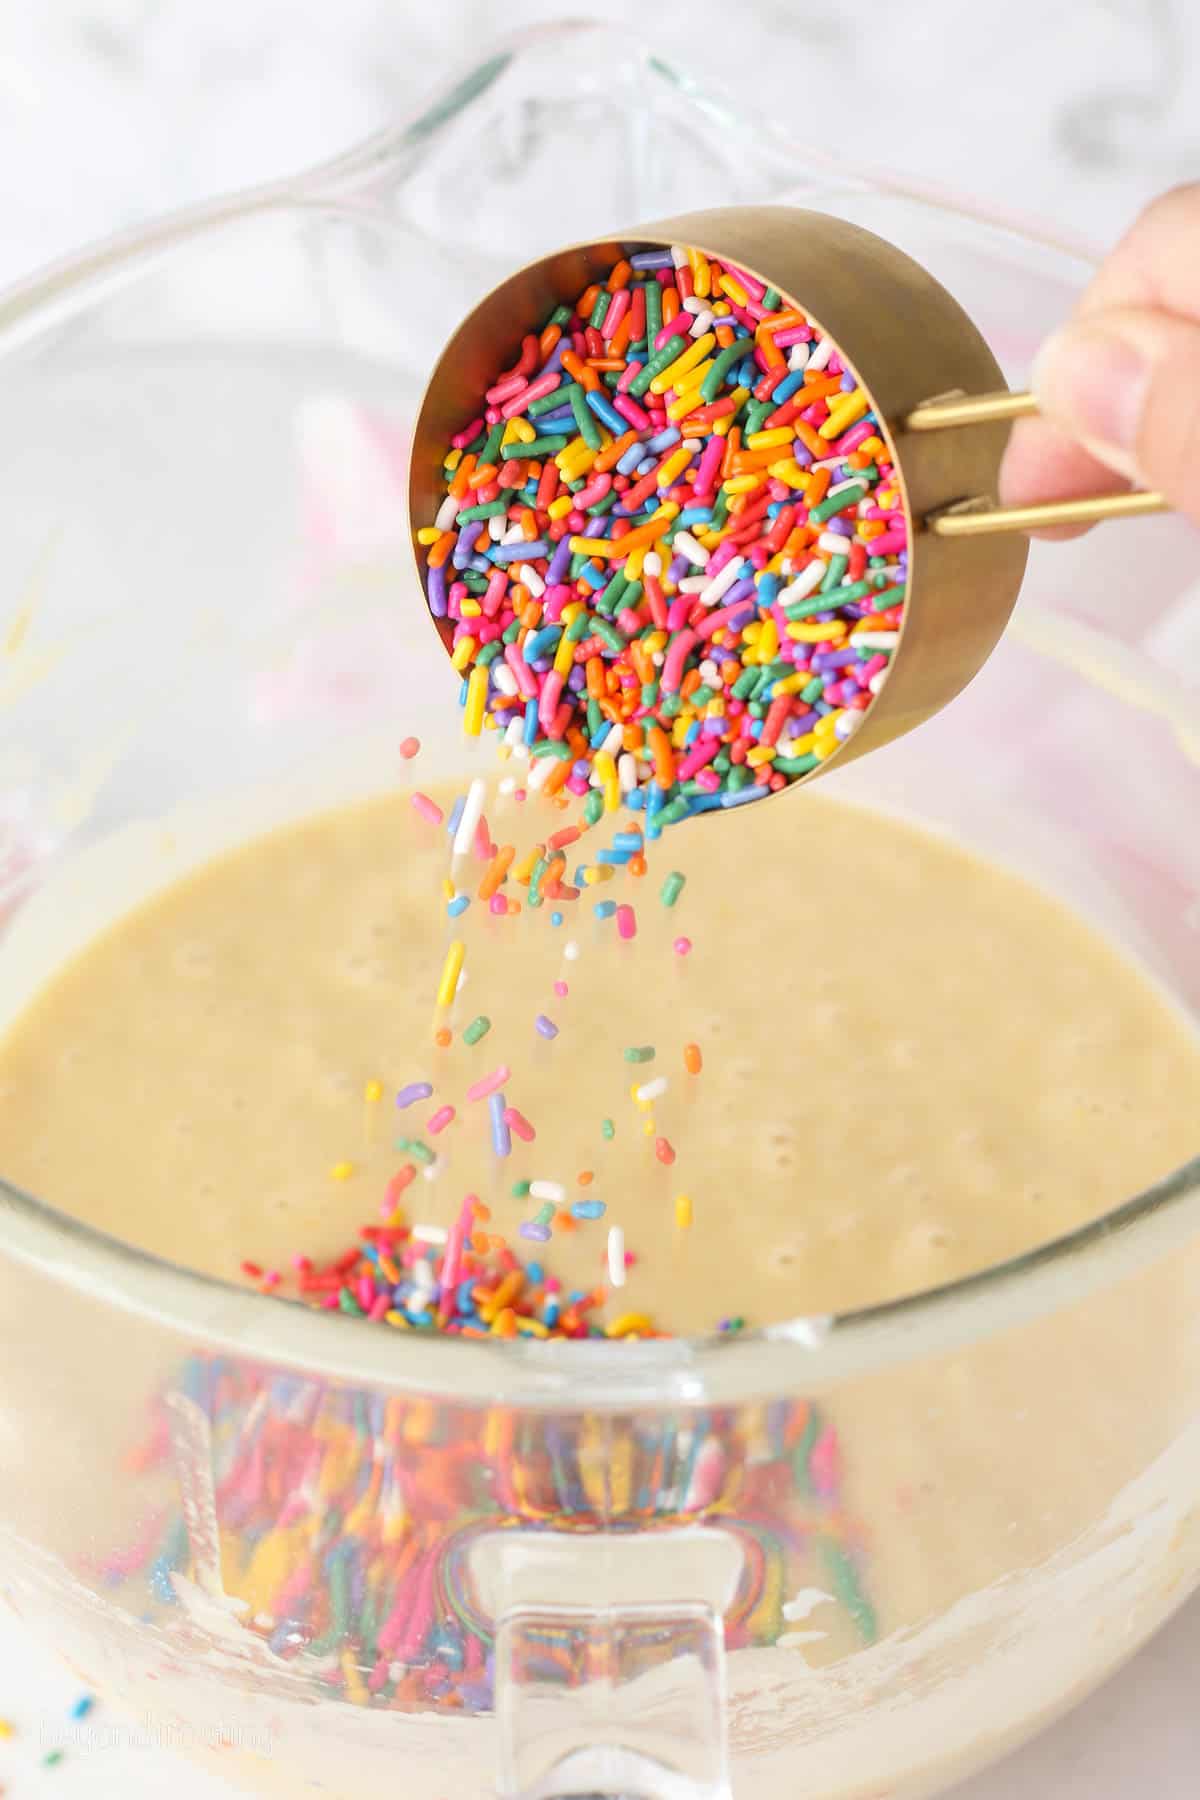 A measuring cup of rainbow sprinkles added to cake batter in a glass bowl.